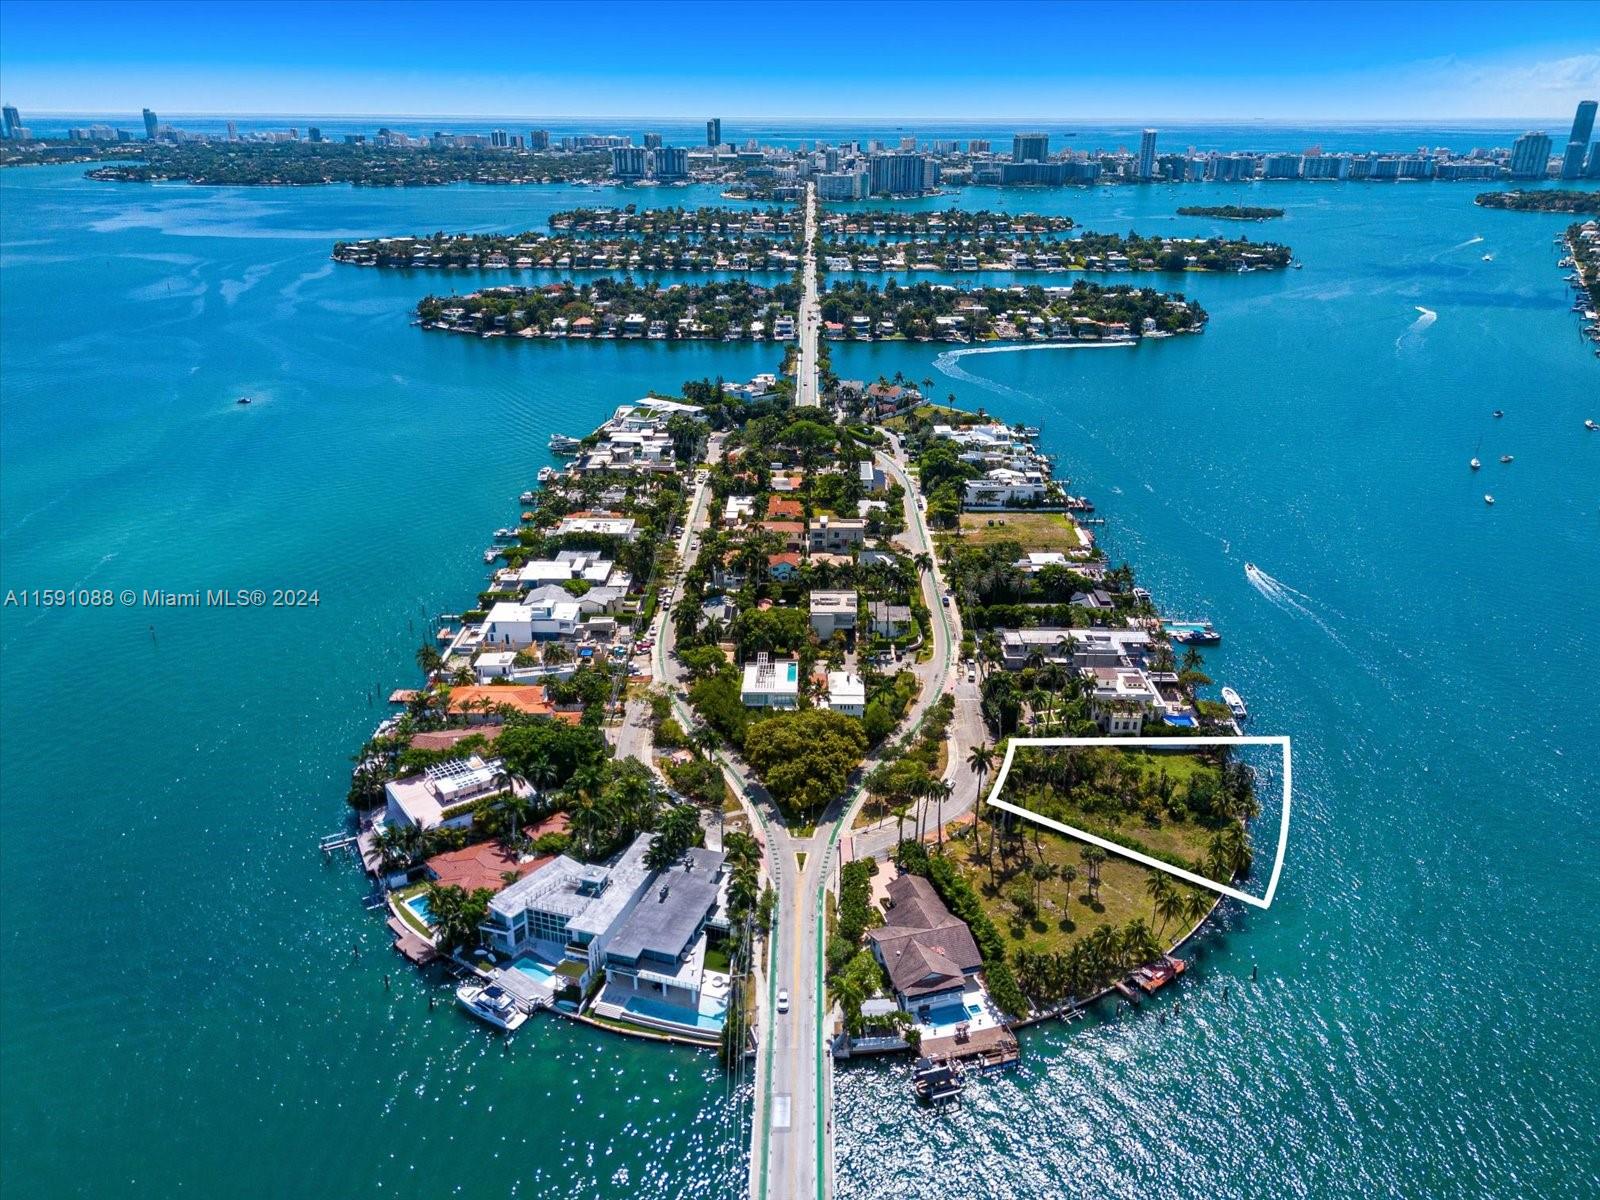 Stunning lot to build your dream home with 206 waterfront on Biscayne Bay with direct downtown sunset views. Prime location within the prestigious Venetian Islands, this remarkable vacant lot spans near 27,000 sq ft, making it one of the largest waterfront parcels available in Miami capable of yielding approx. 18,500 sq ft residence. Build higher with first floor at 15 ft NGVD and design an understory that will provide garage parking for over 12 luxury cars. The property sale includes approved and permitted plans for a beautiful home designed by Richard Landry. It will save buyers two years of time that it takes to design, review plans and get permits approved. With permitted plans ready for contractor to break ground you will save worth millions of dollars in development costs and time.